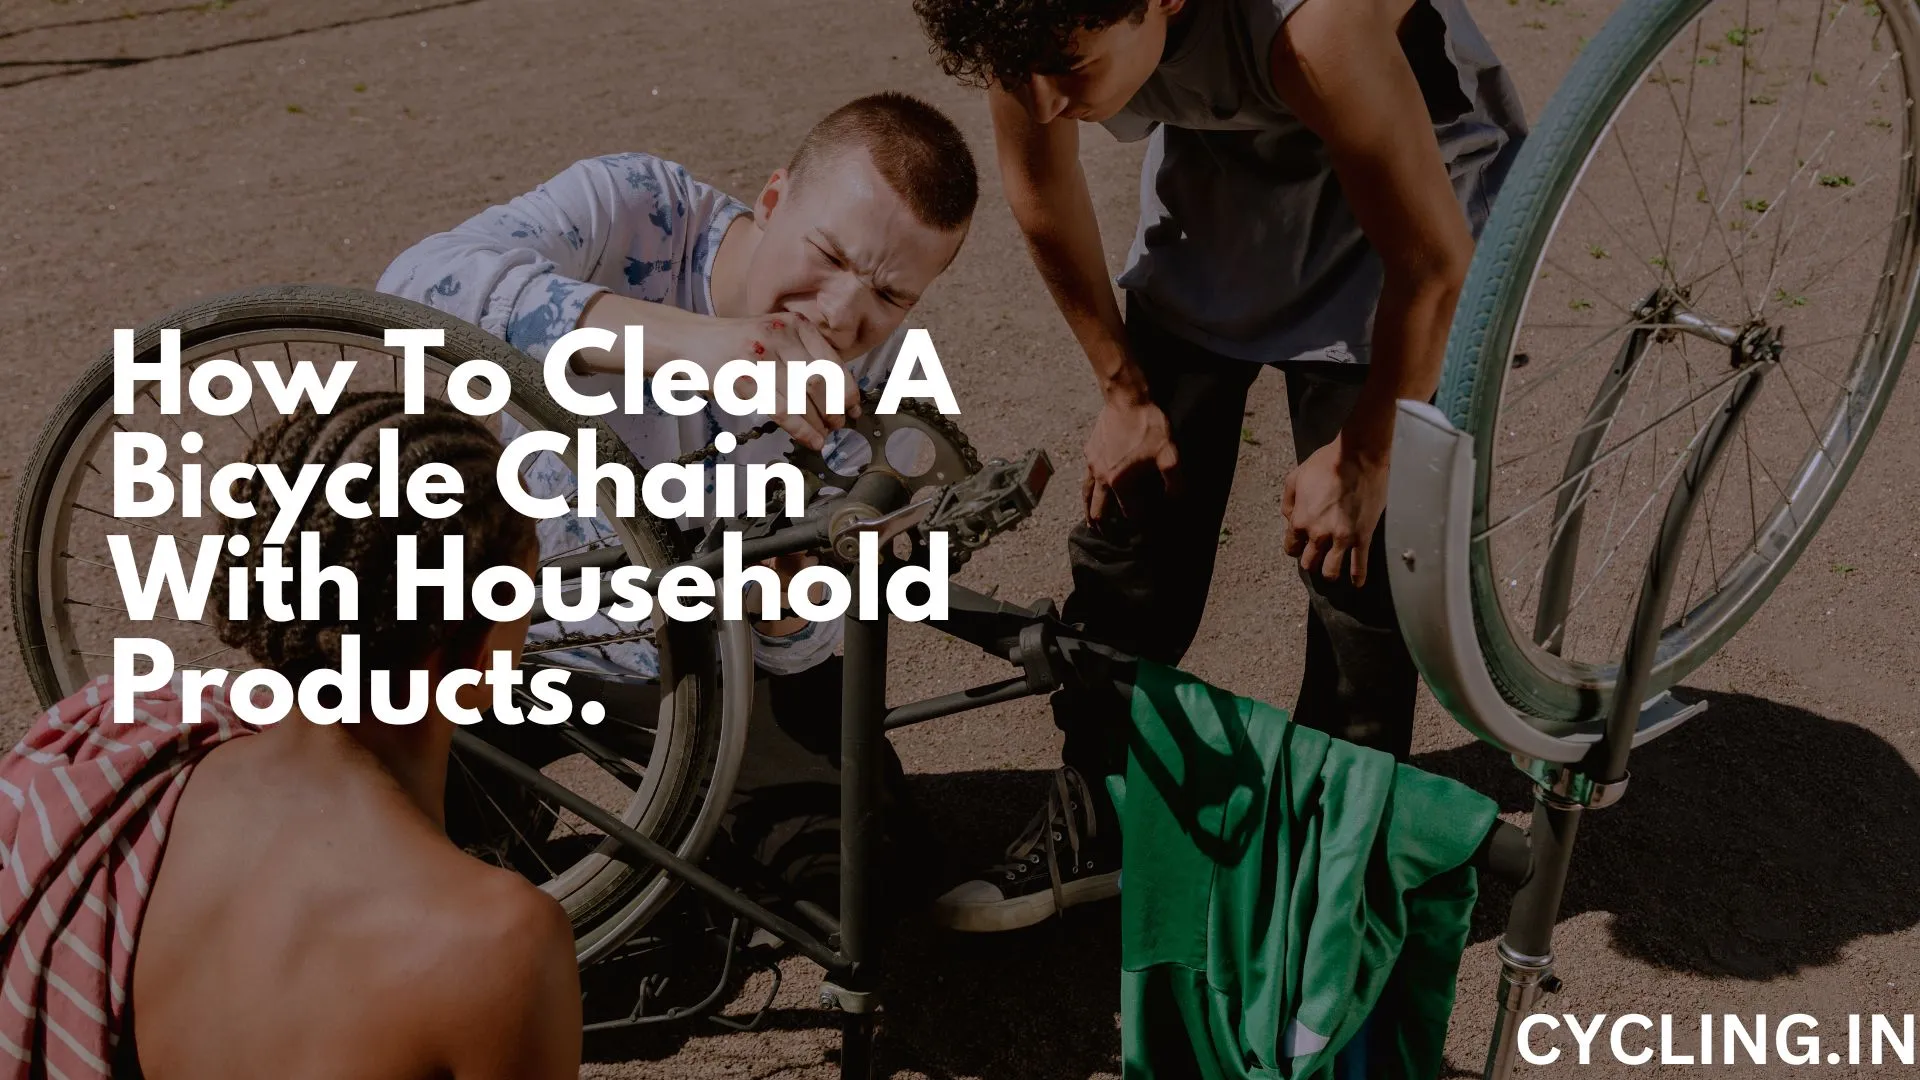 How to Clean a Bicycle Chain With Household Products - Three Kids Fixing their Bicycle Chain.